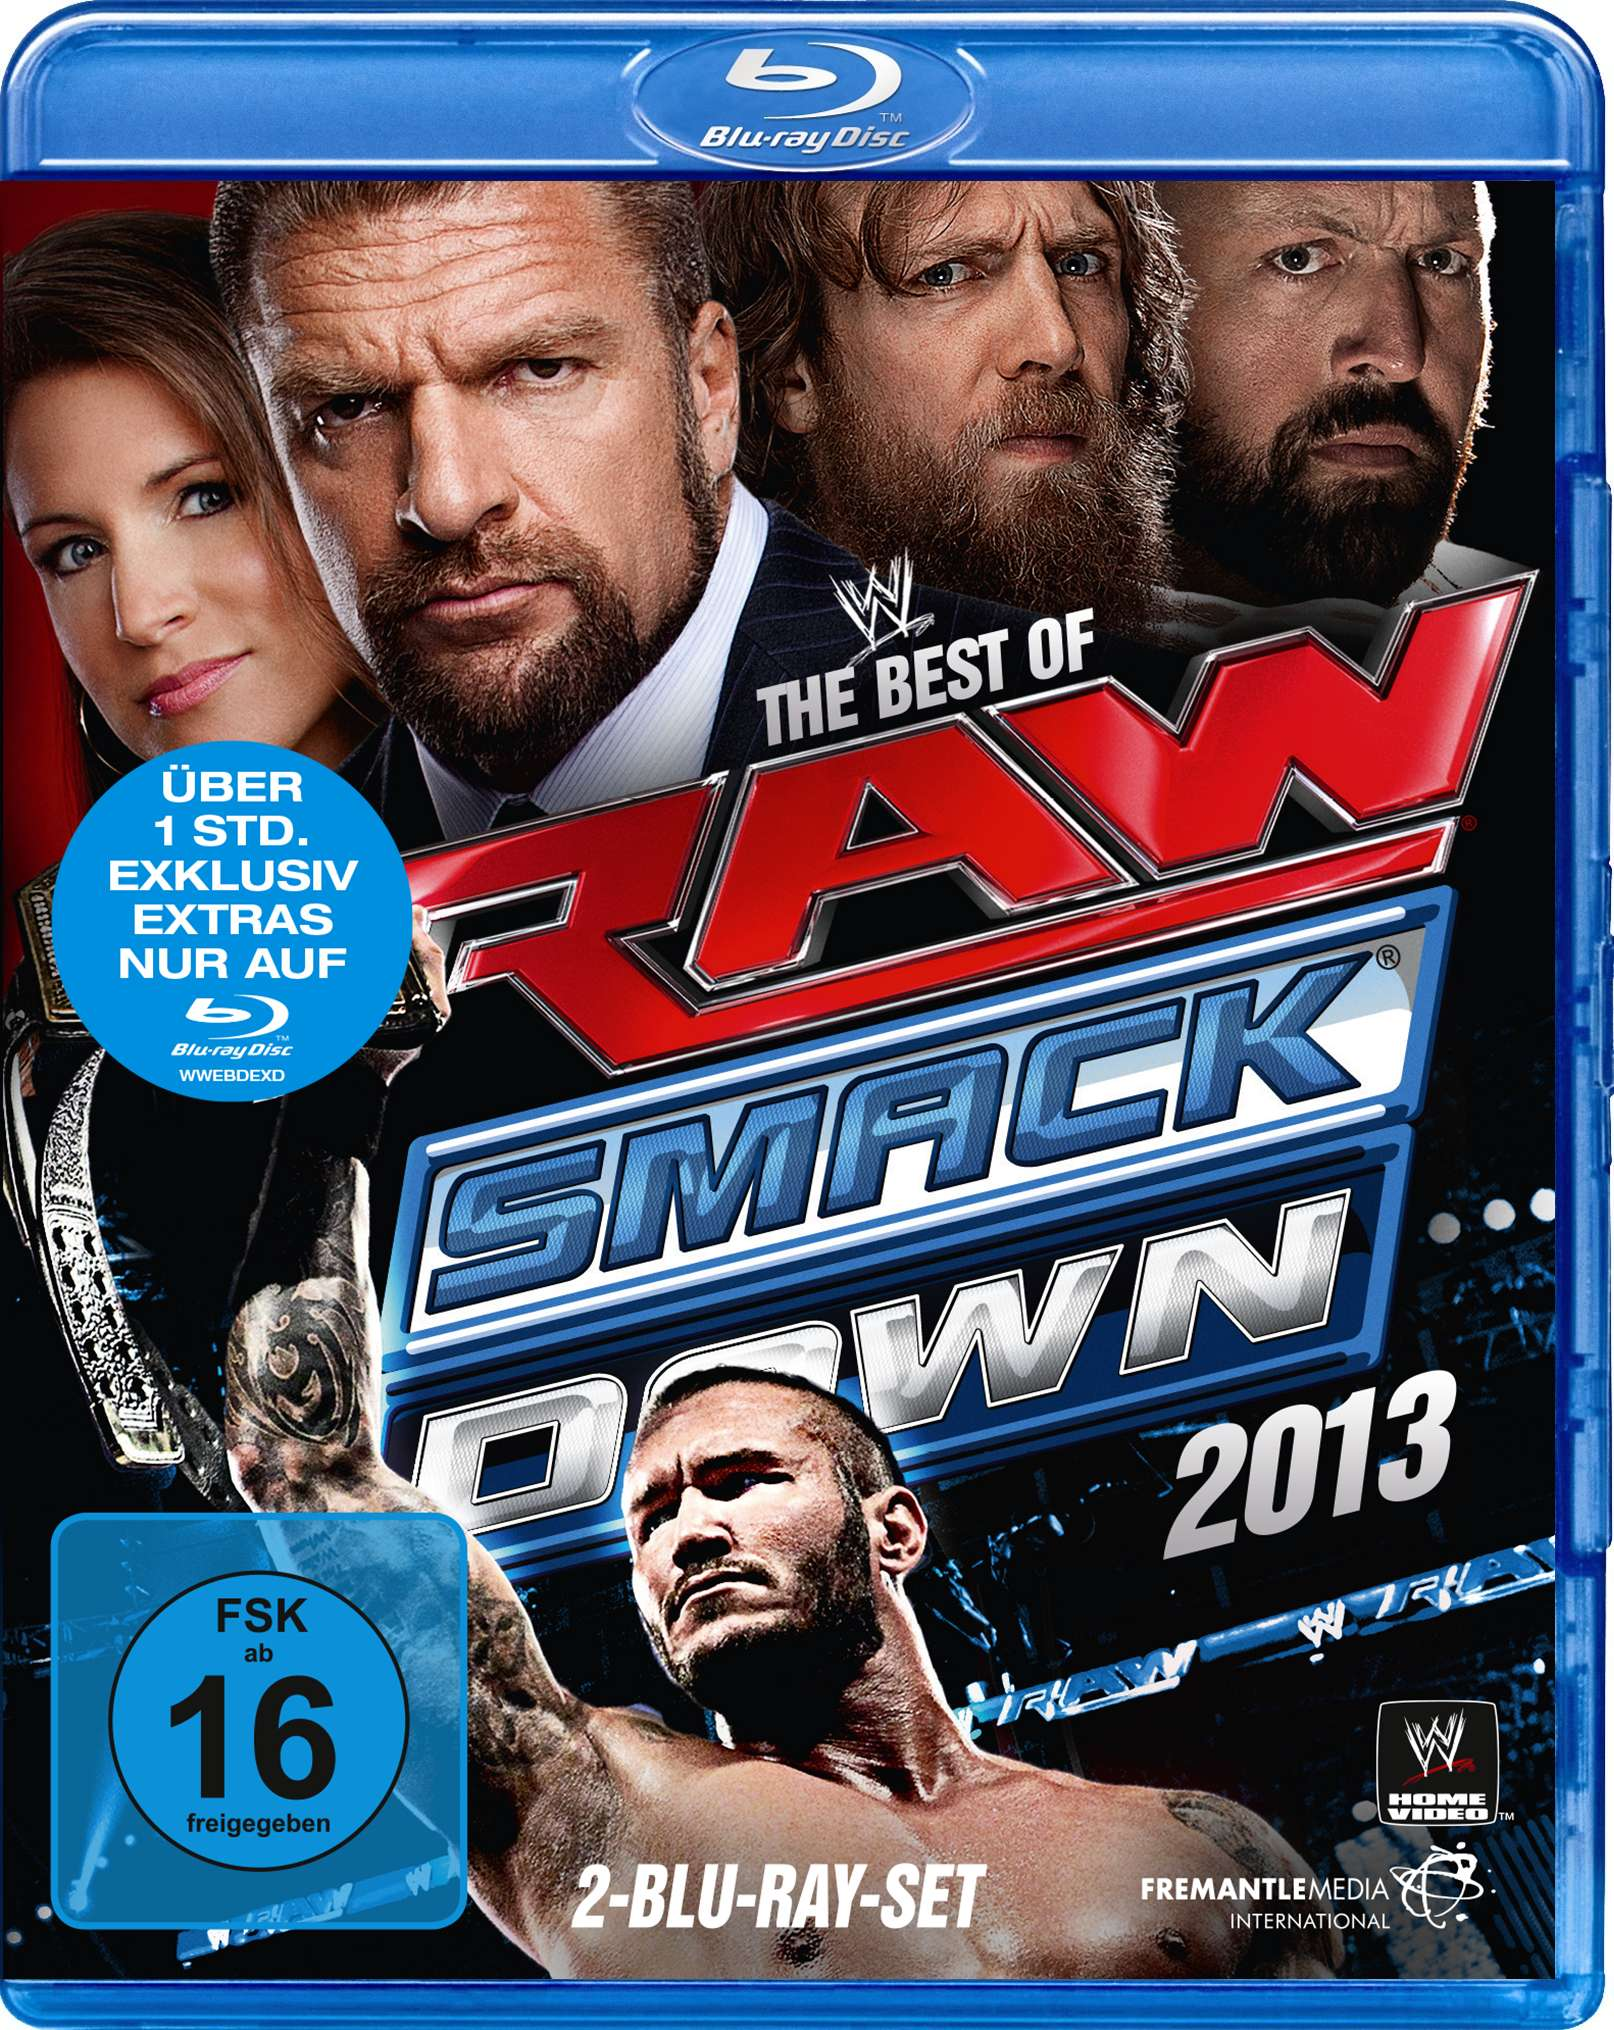 & The 2013 Best Of Smackdown Raw Blu-ray